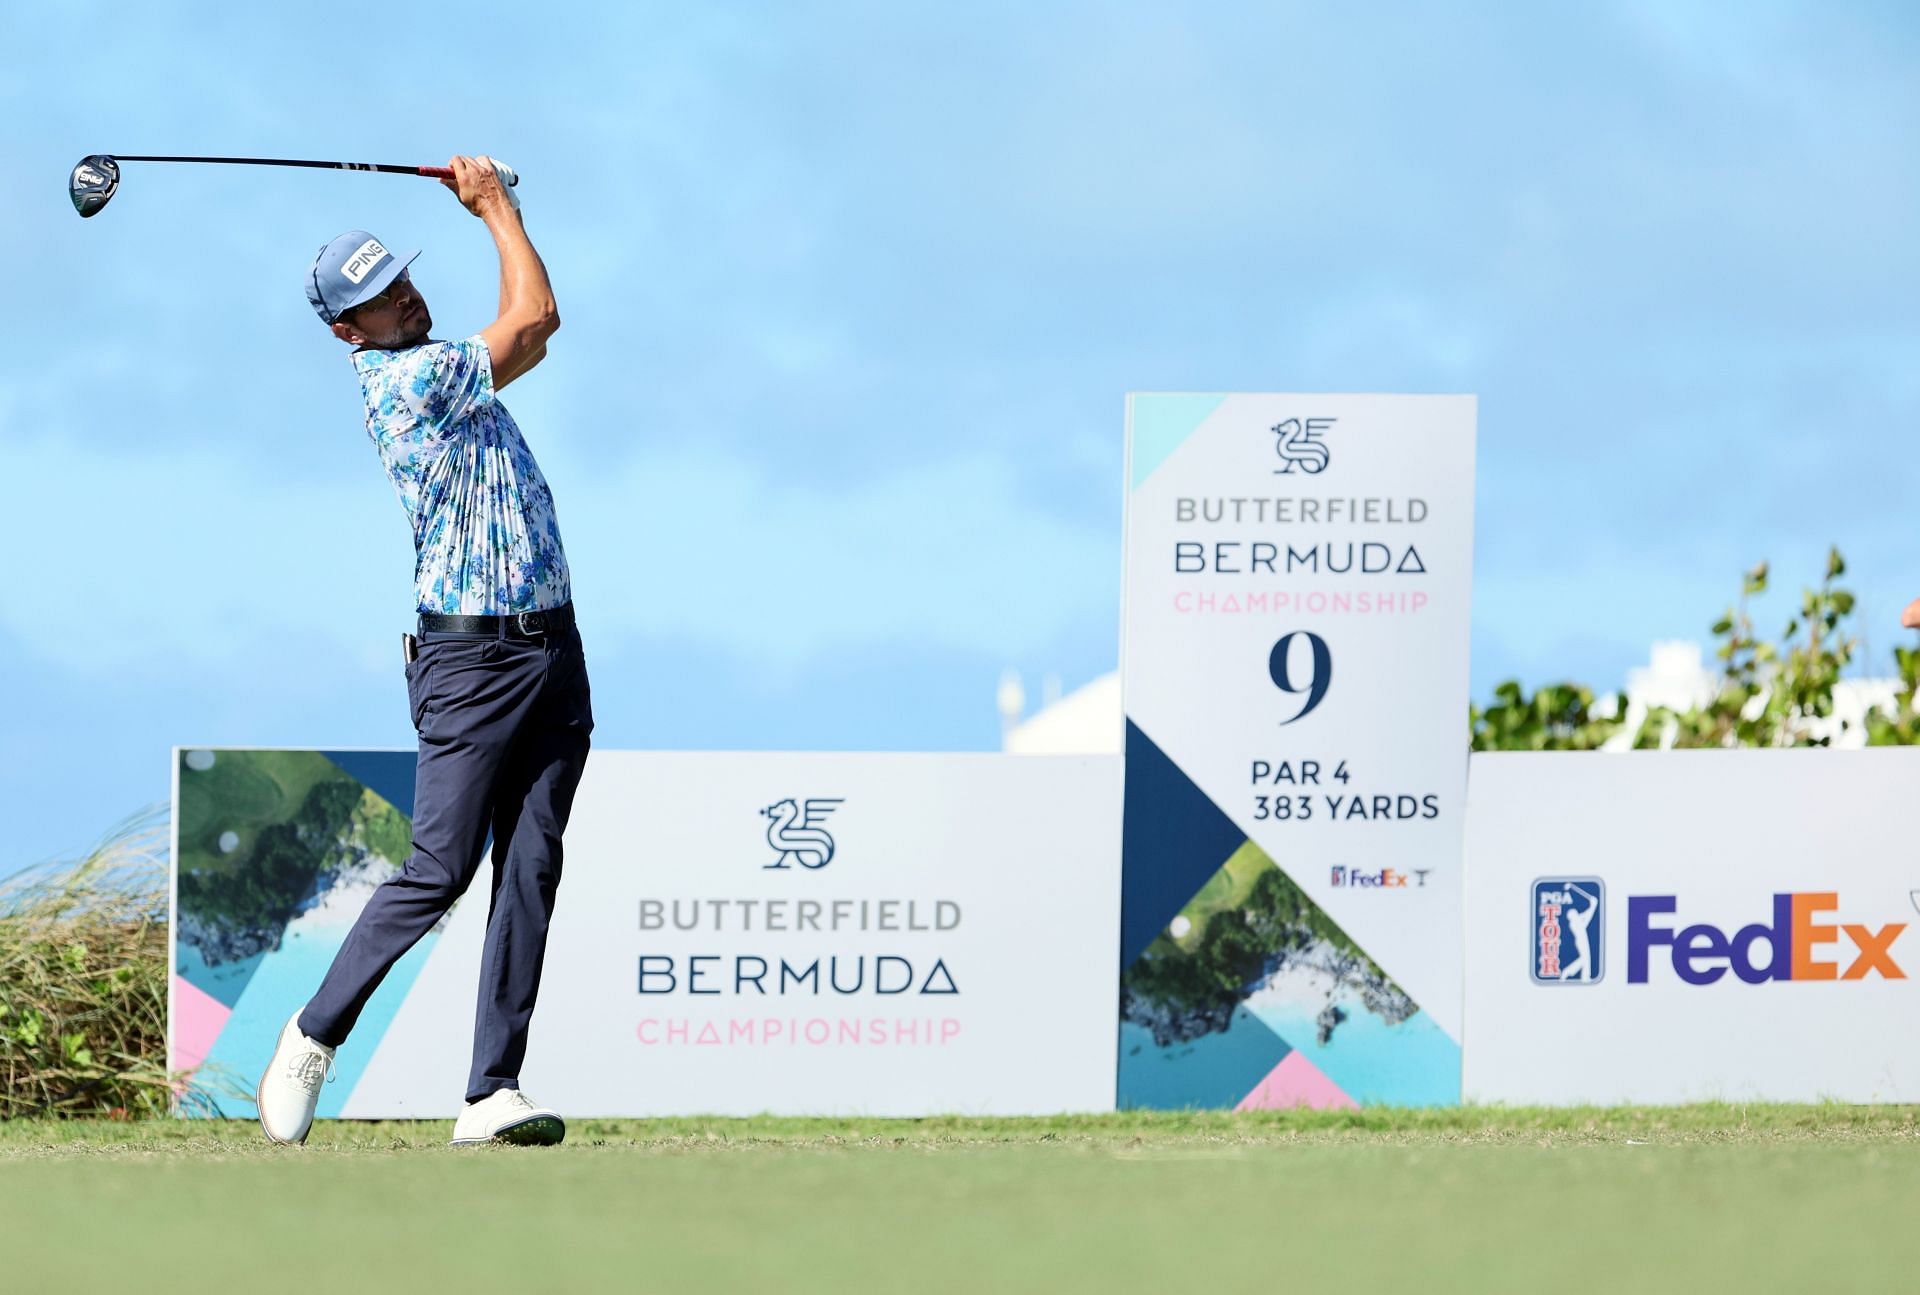 2023 Butterfield Bermuda Championship field and player rankings explored